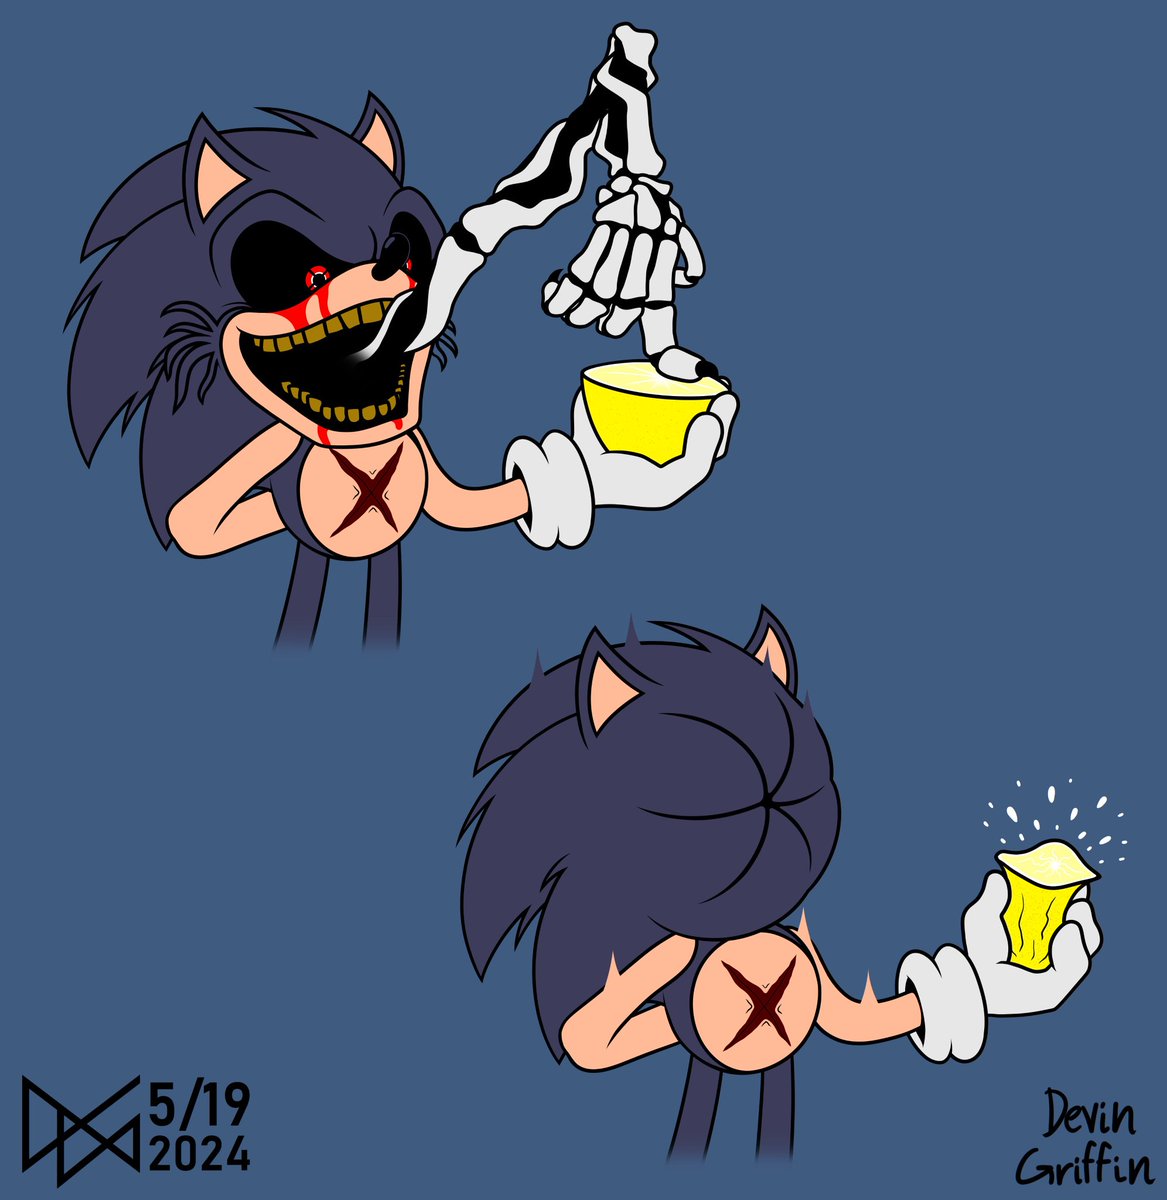 Twitter algorithm hates me, so trying again. I had a goofy idea the other day and drew this. I'm not really huge on the whole exe thing, but I like when the spooky sonics are complete goofballs #sonicexe #sonicfnf #sonic #lordx